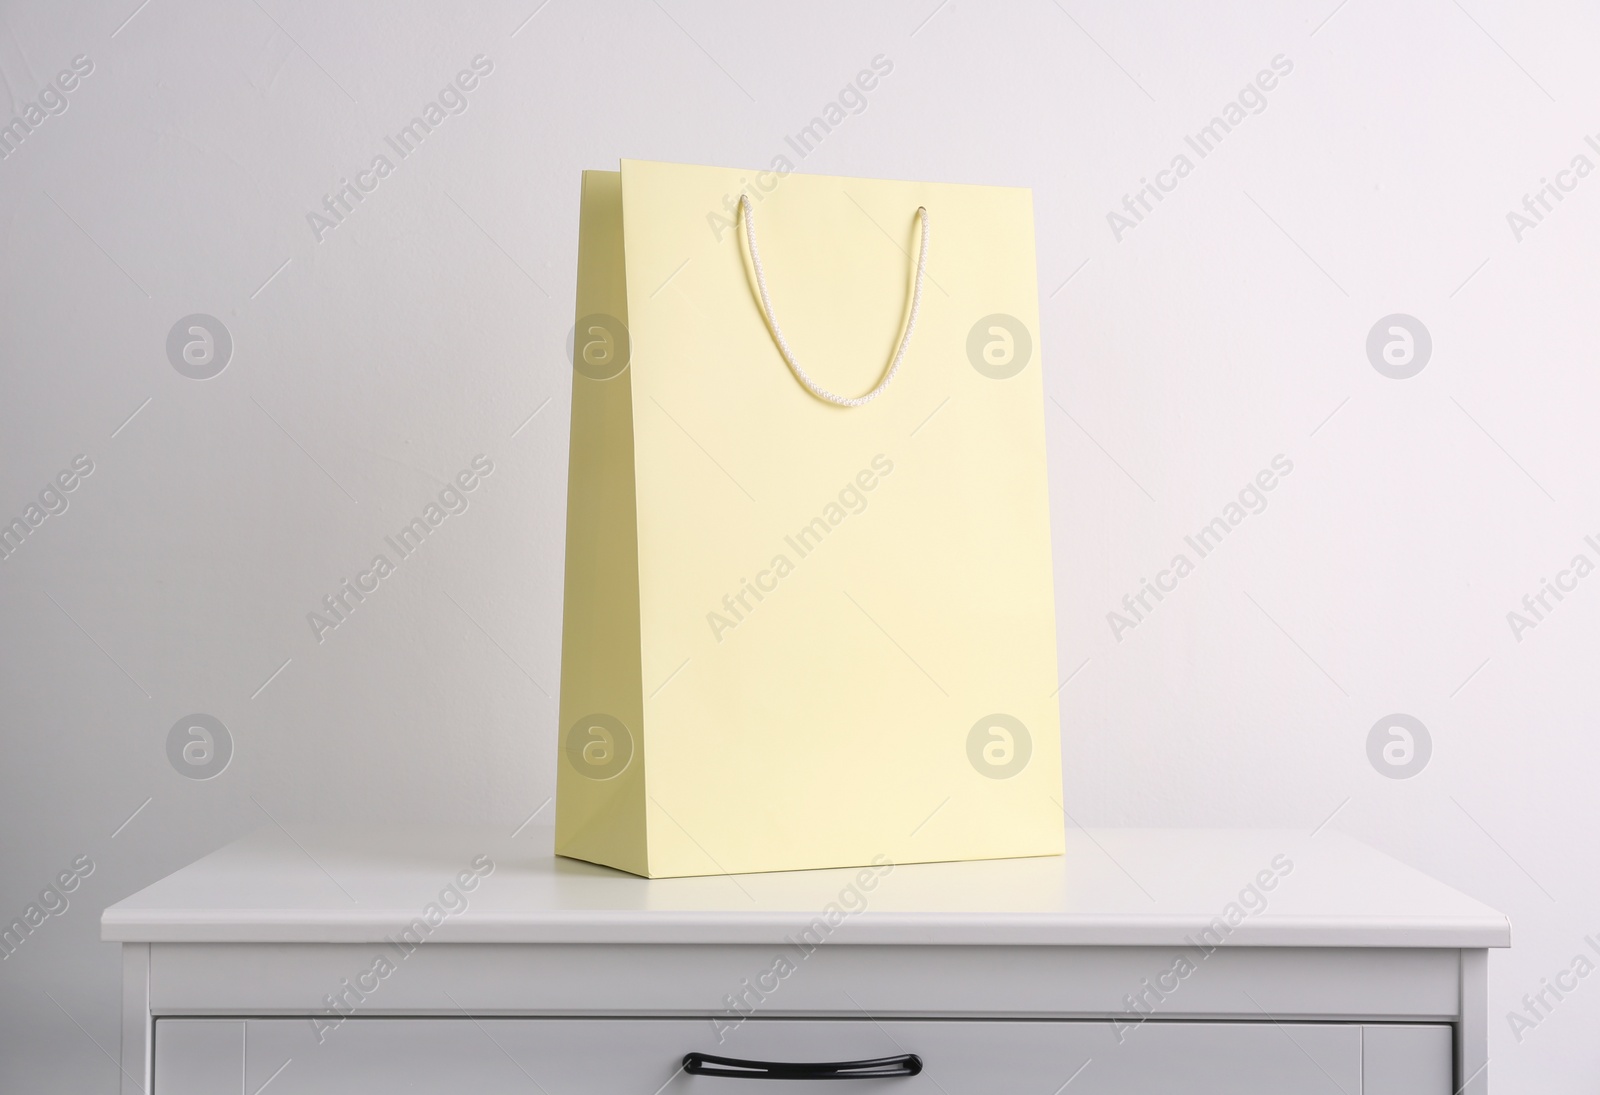 Photo of Paper shopping bag on white chest of drawers against light background